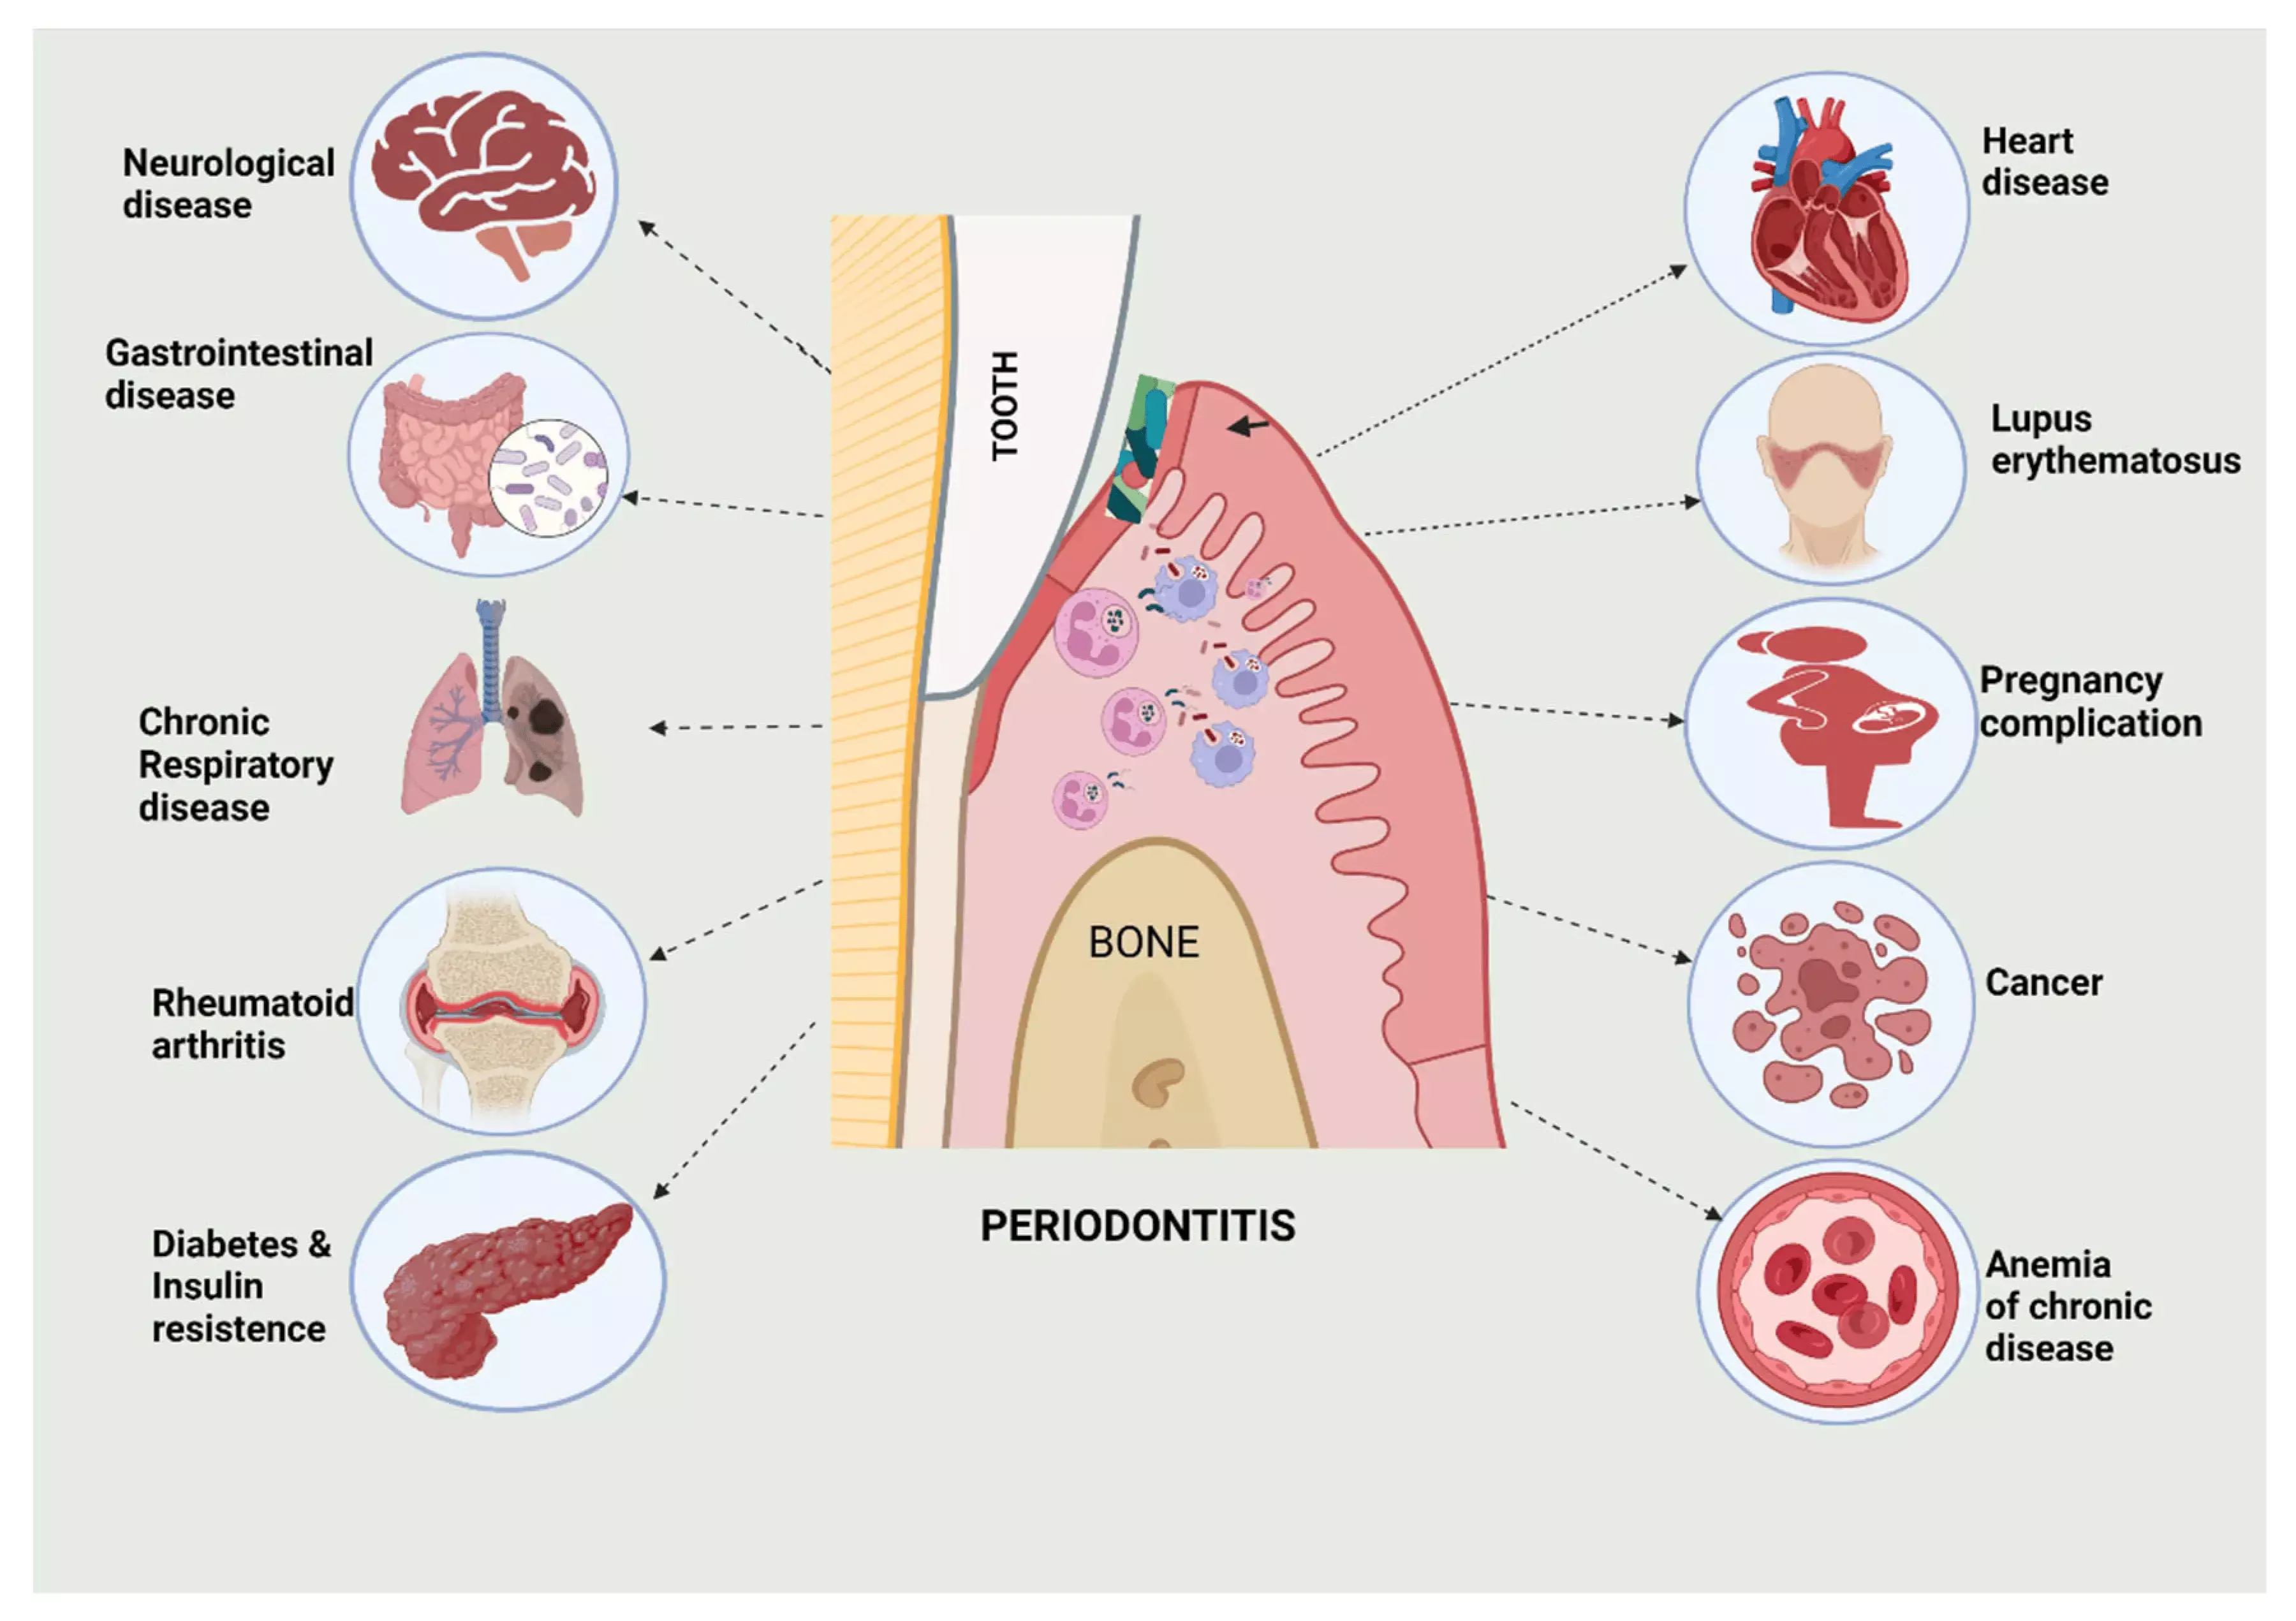 Patients of autoimmune liver disease treated with immune suppressants have lower prevalence of apical periodontitis: Study